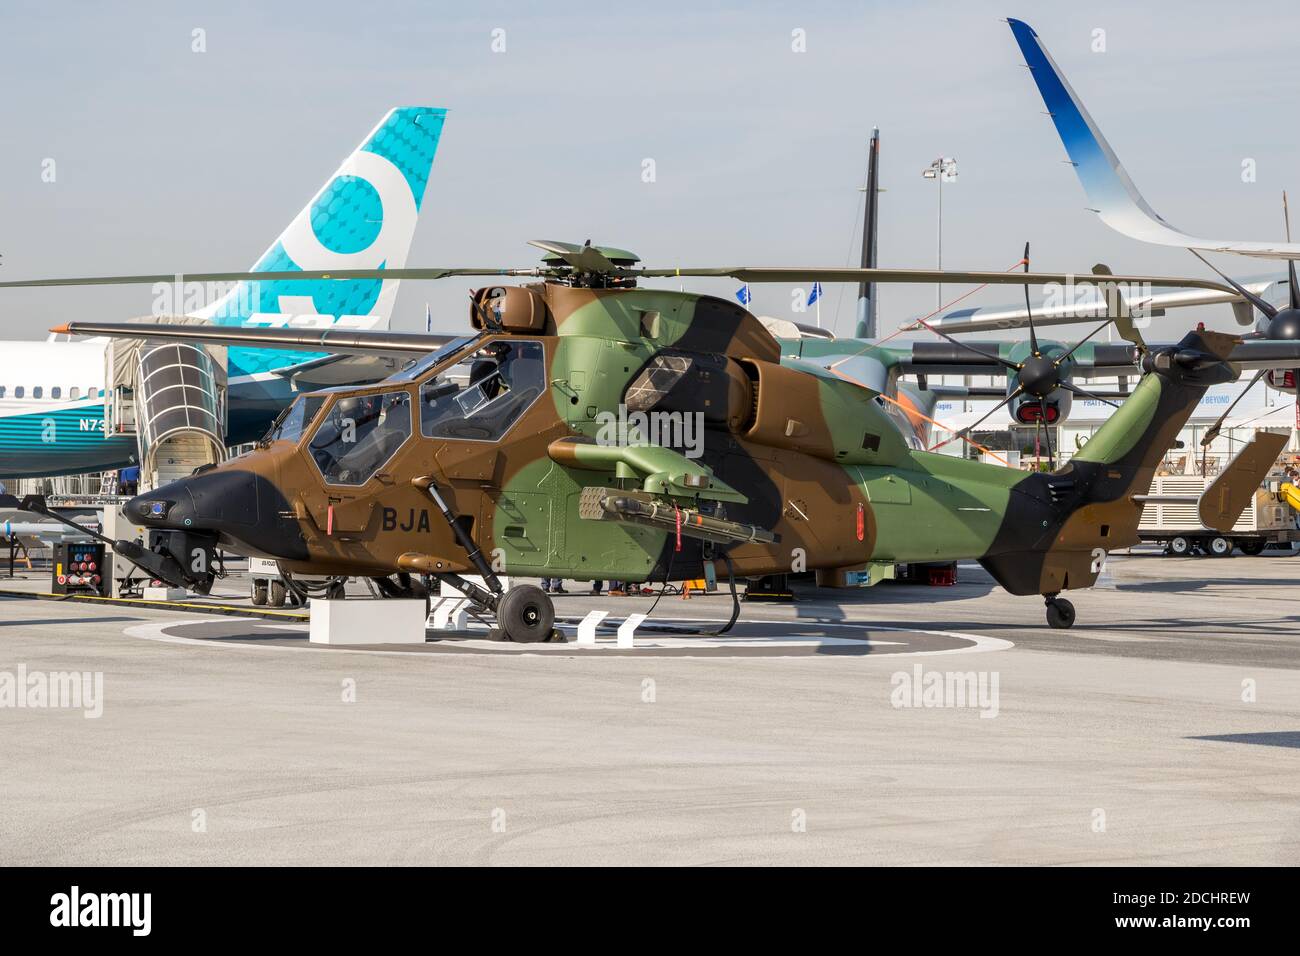 French Army Eurocopter (Airbus) Tiger military attack helicopter on display at the Paris Air Show. France - June 22, 2017 Stock Photo